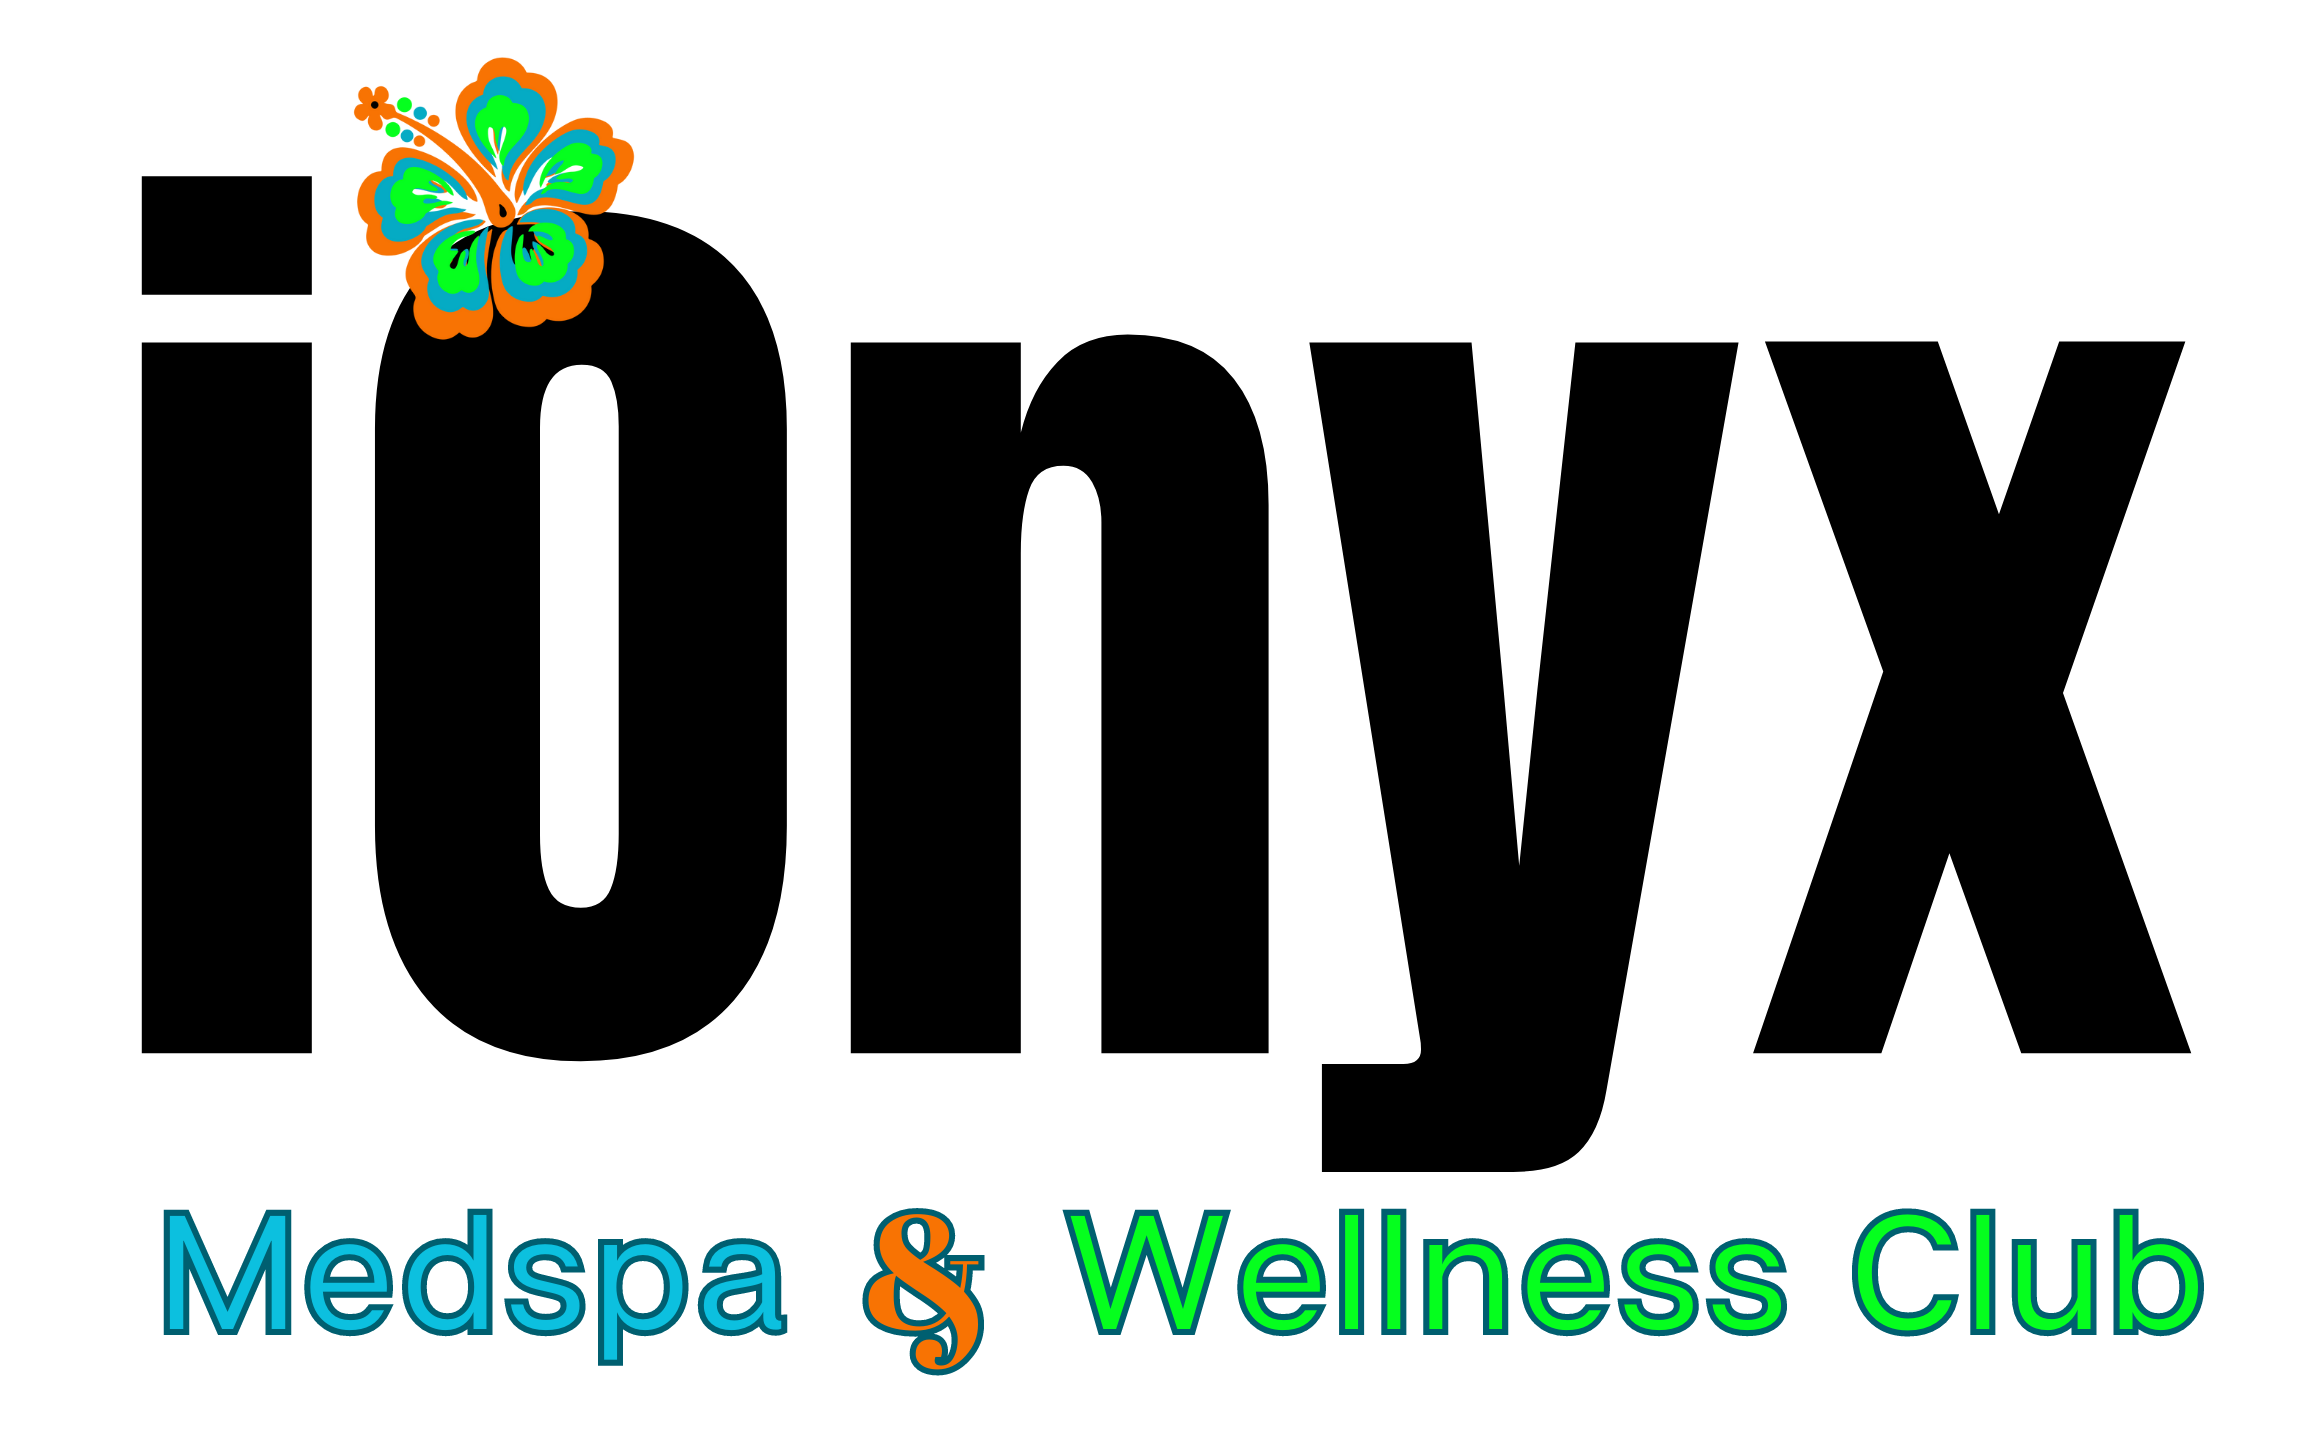 Come into our medspa in Merritt Island, FL for a massage, weight loss, skincare, laser lipo, semaglutide, iv therapy, lymphatic drainage, and more.